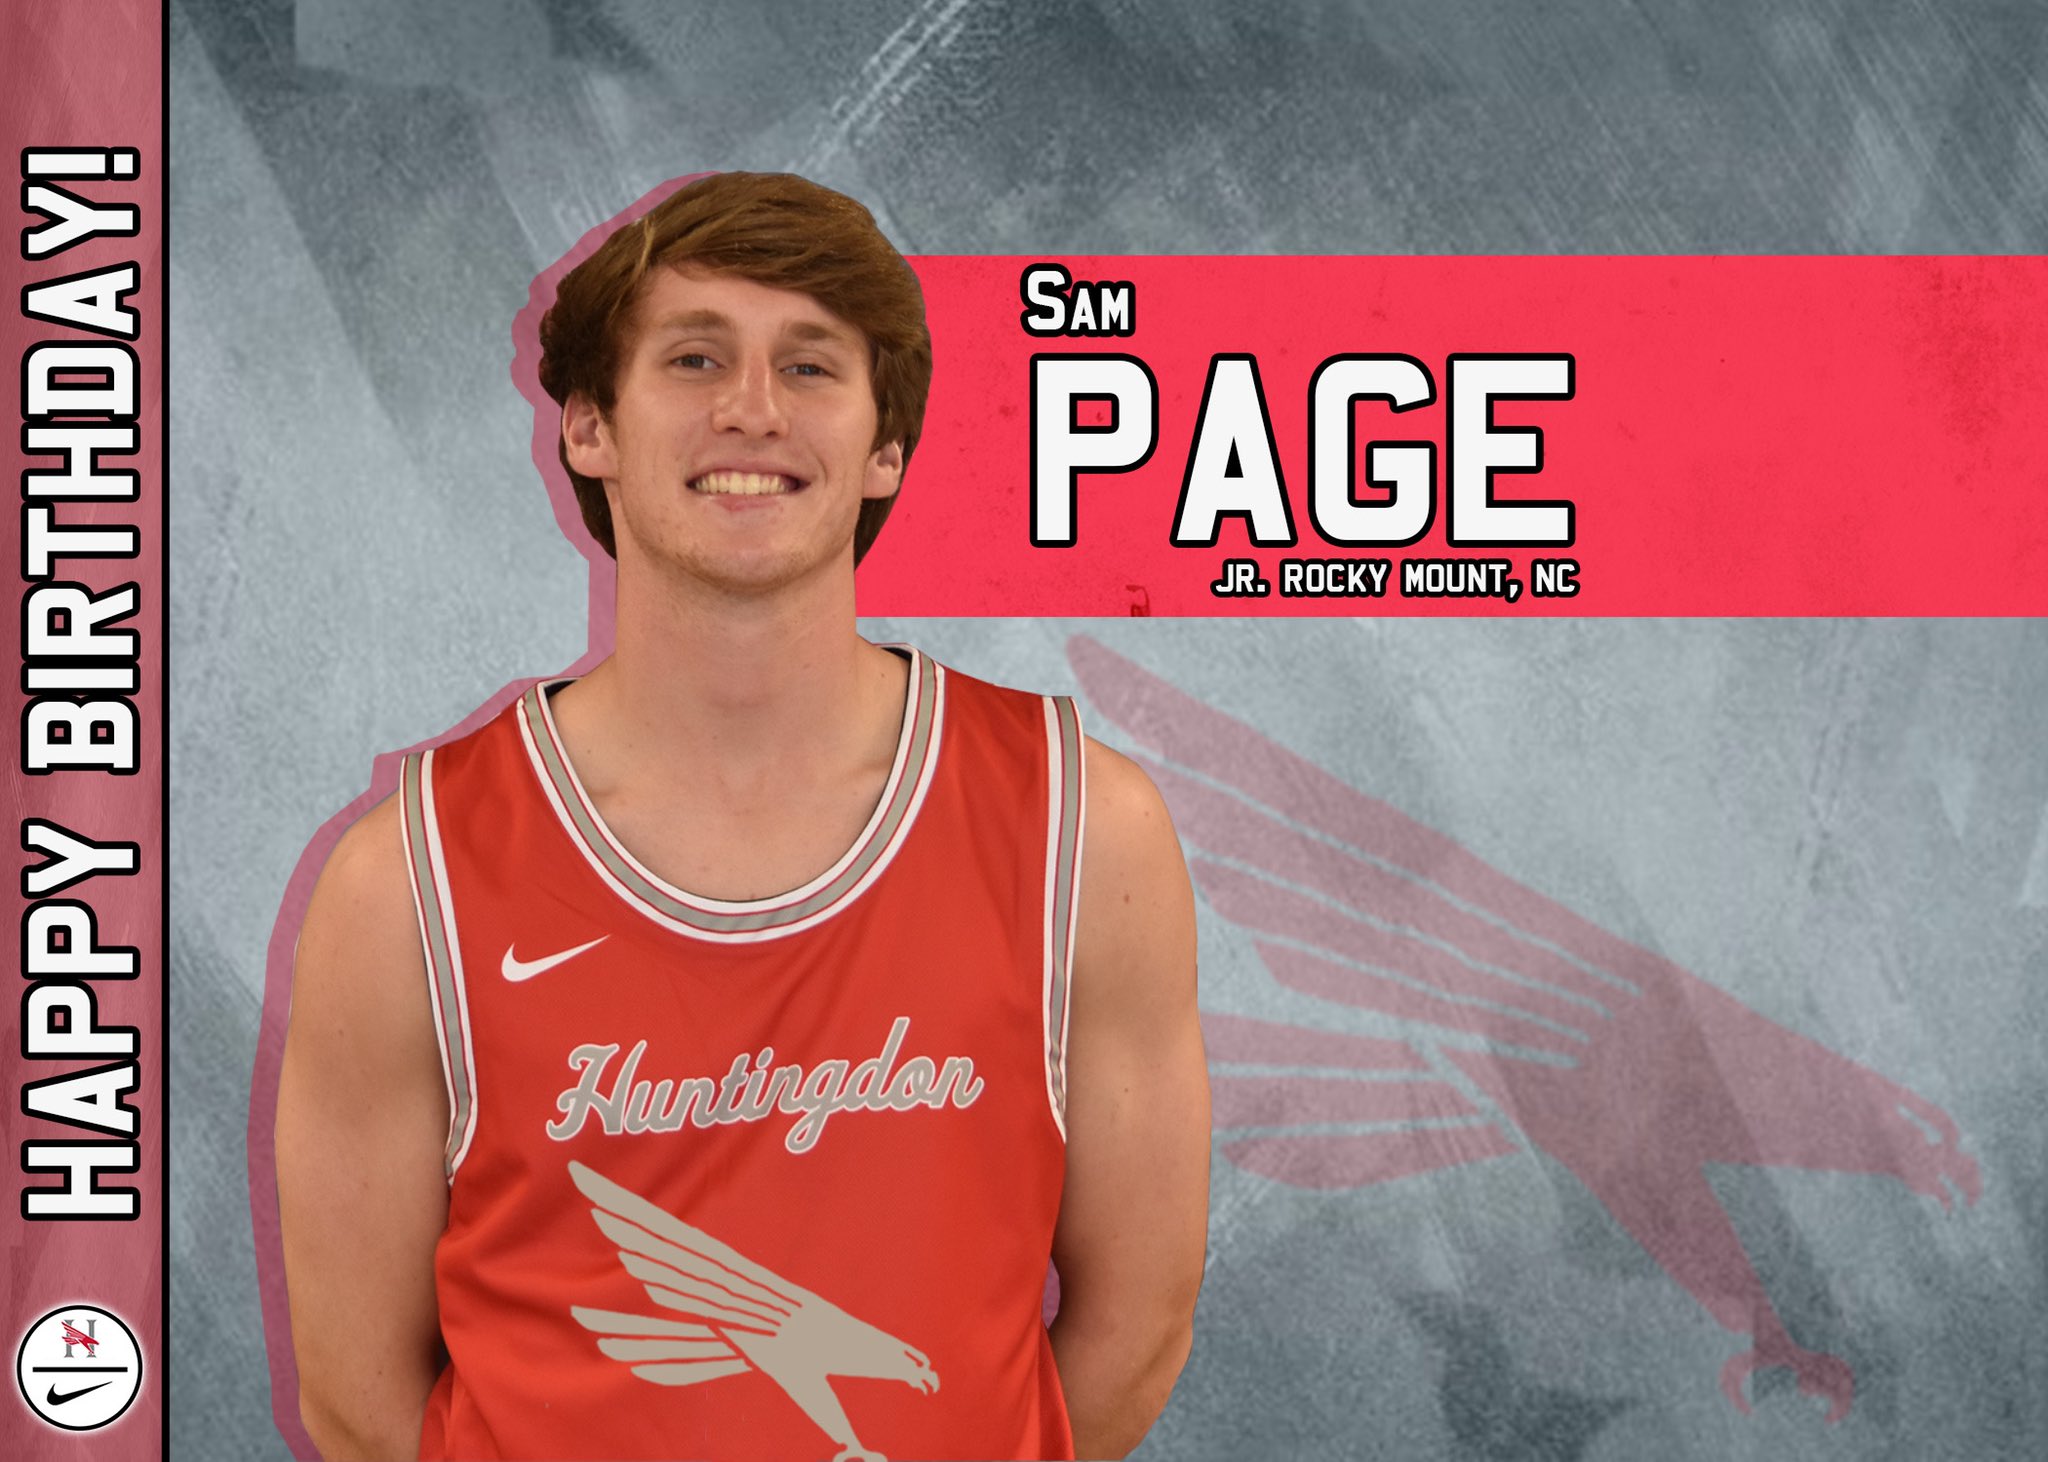 Join us as we wish Happy Birthday to our guy, Sam Page!  